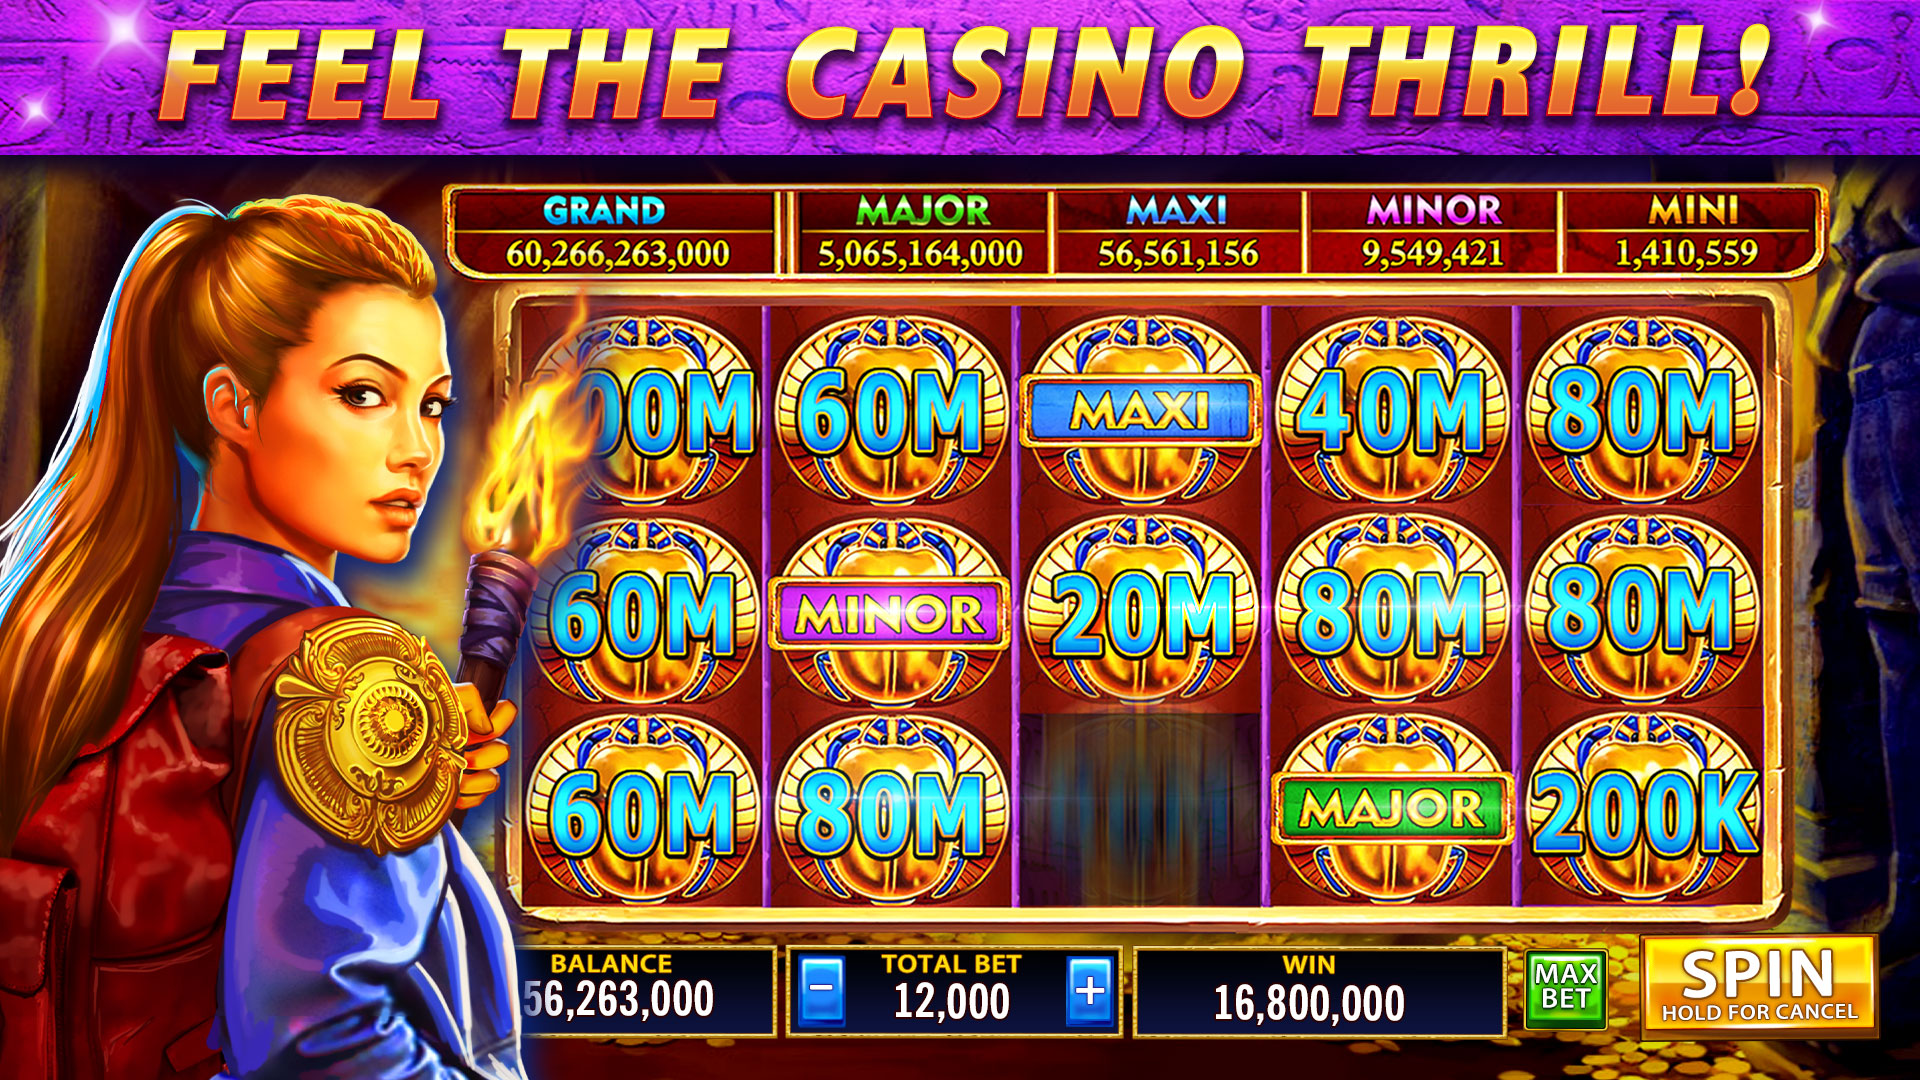 Slots - Casino Vegas Slots - Free Casino Slot Machine Games,Slot Machine  Games Free,Slots With Bonus Games,Slots Free,Casino Slot Games,Free Slots  Casino,Slots Machines Casino,Casino Games For Free::Appstore for  Android